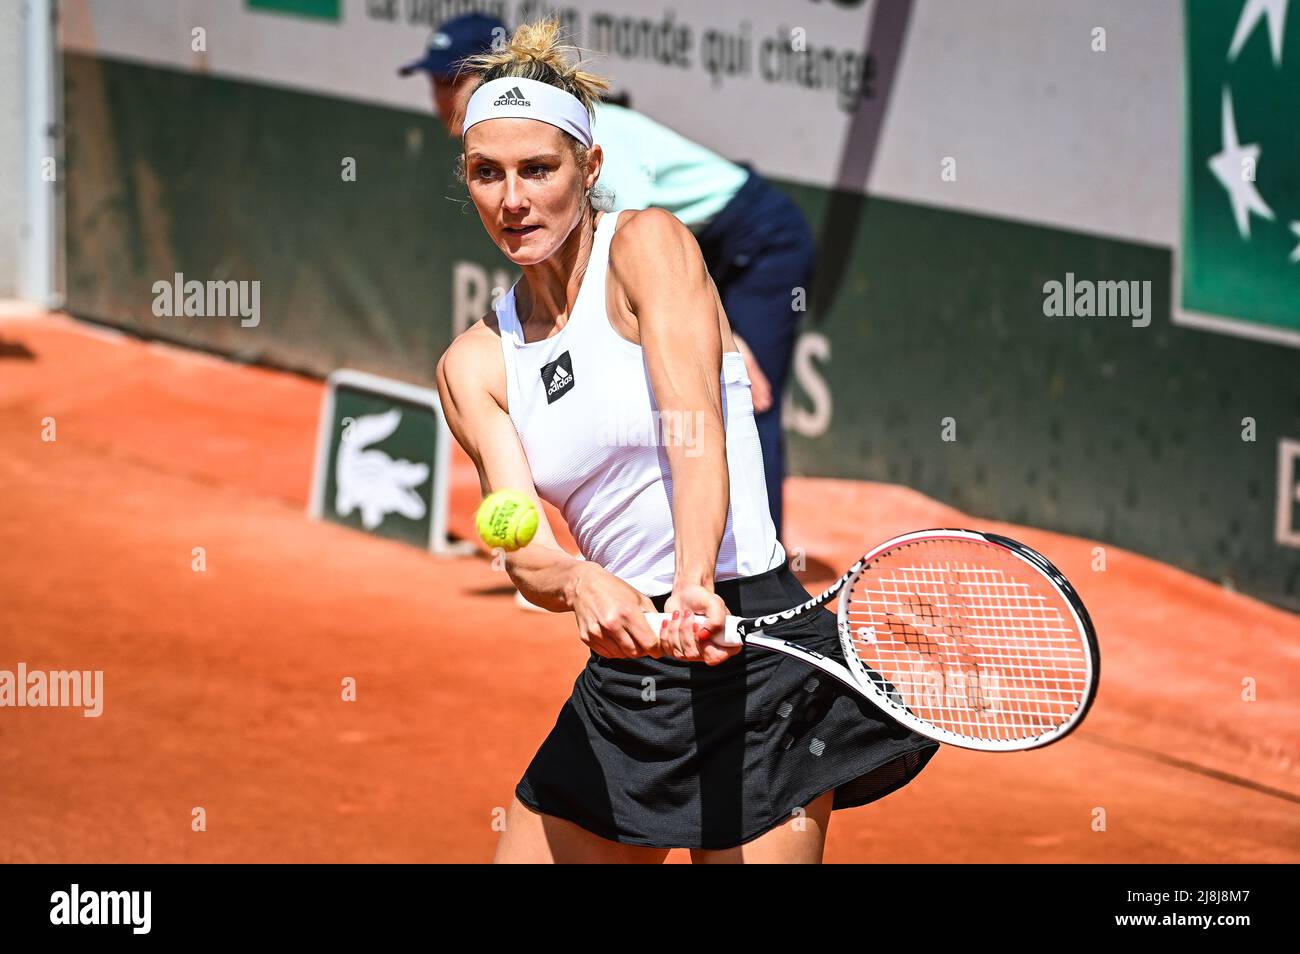 May 16, 2022, Paris, France: Audrey ALBIE of France during the Qualifying  Day one of Roland-Garros 2022, French Open 2022, Grand Slam tennis  tournament on May 16, 2022 at the Roland-Garros stadium